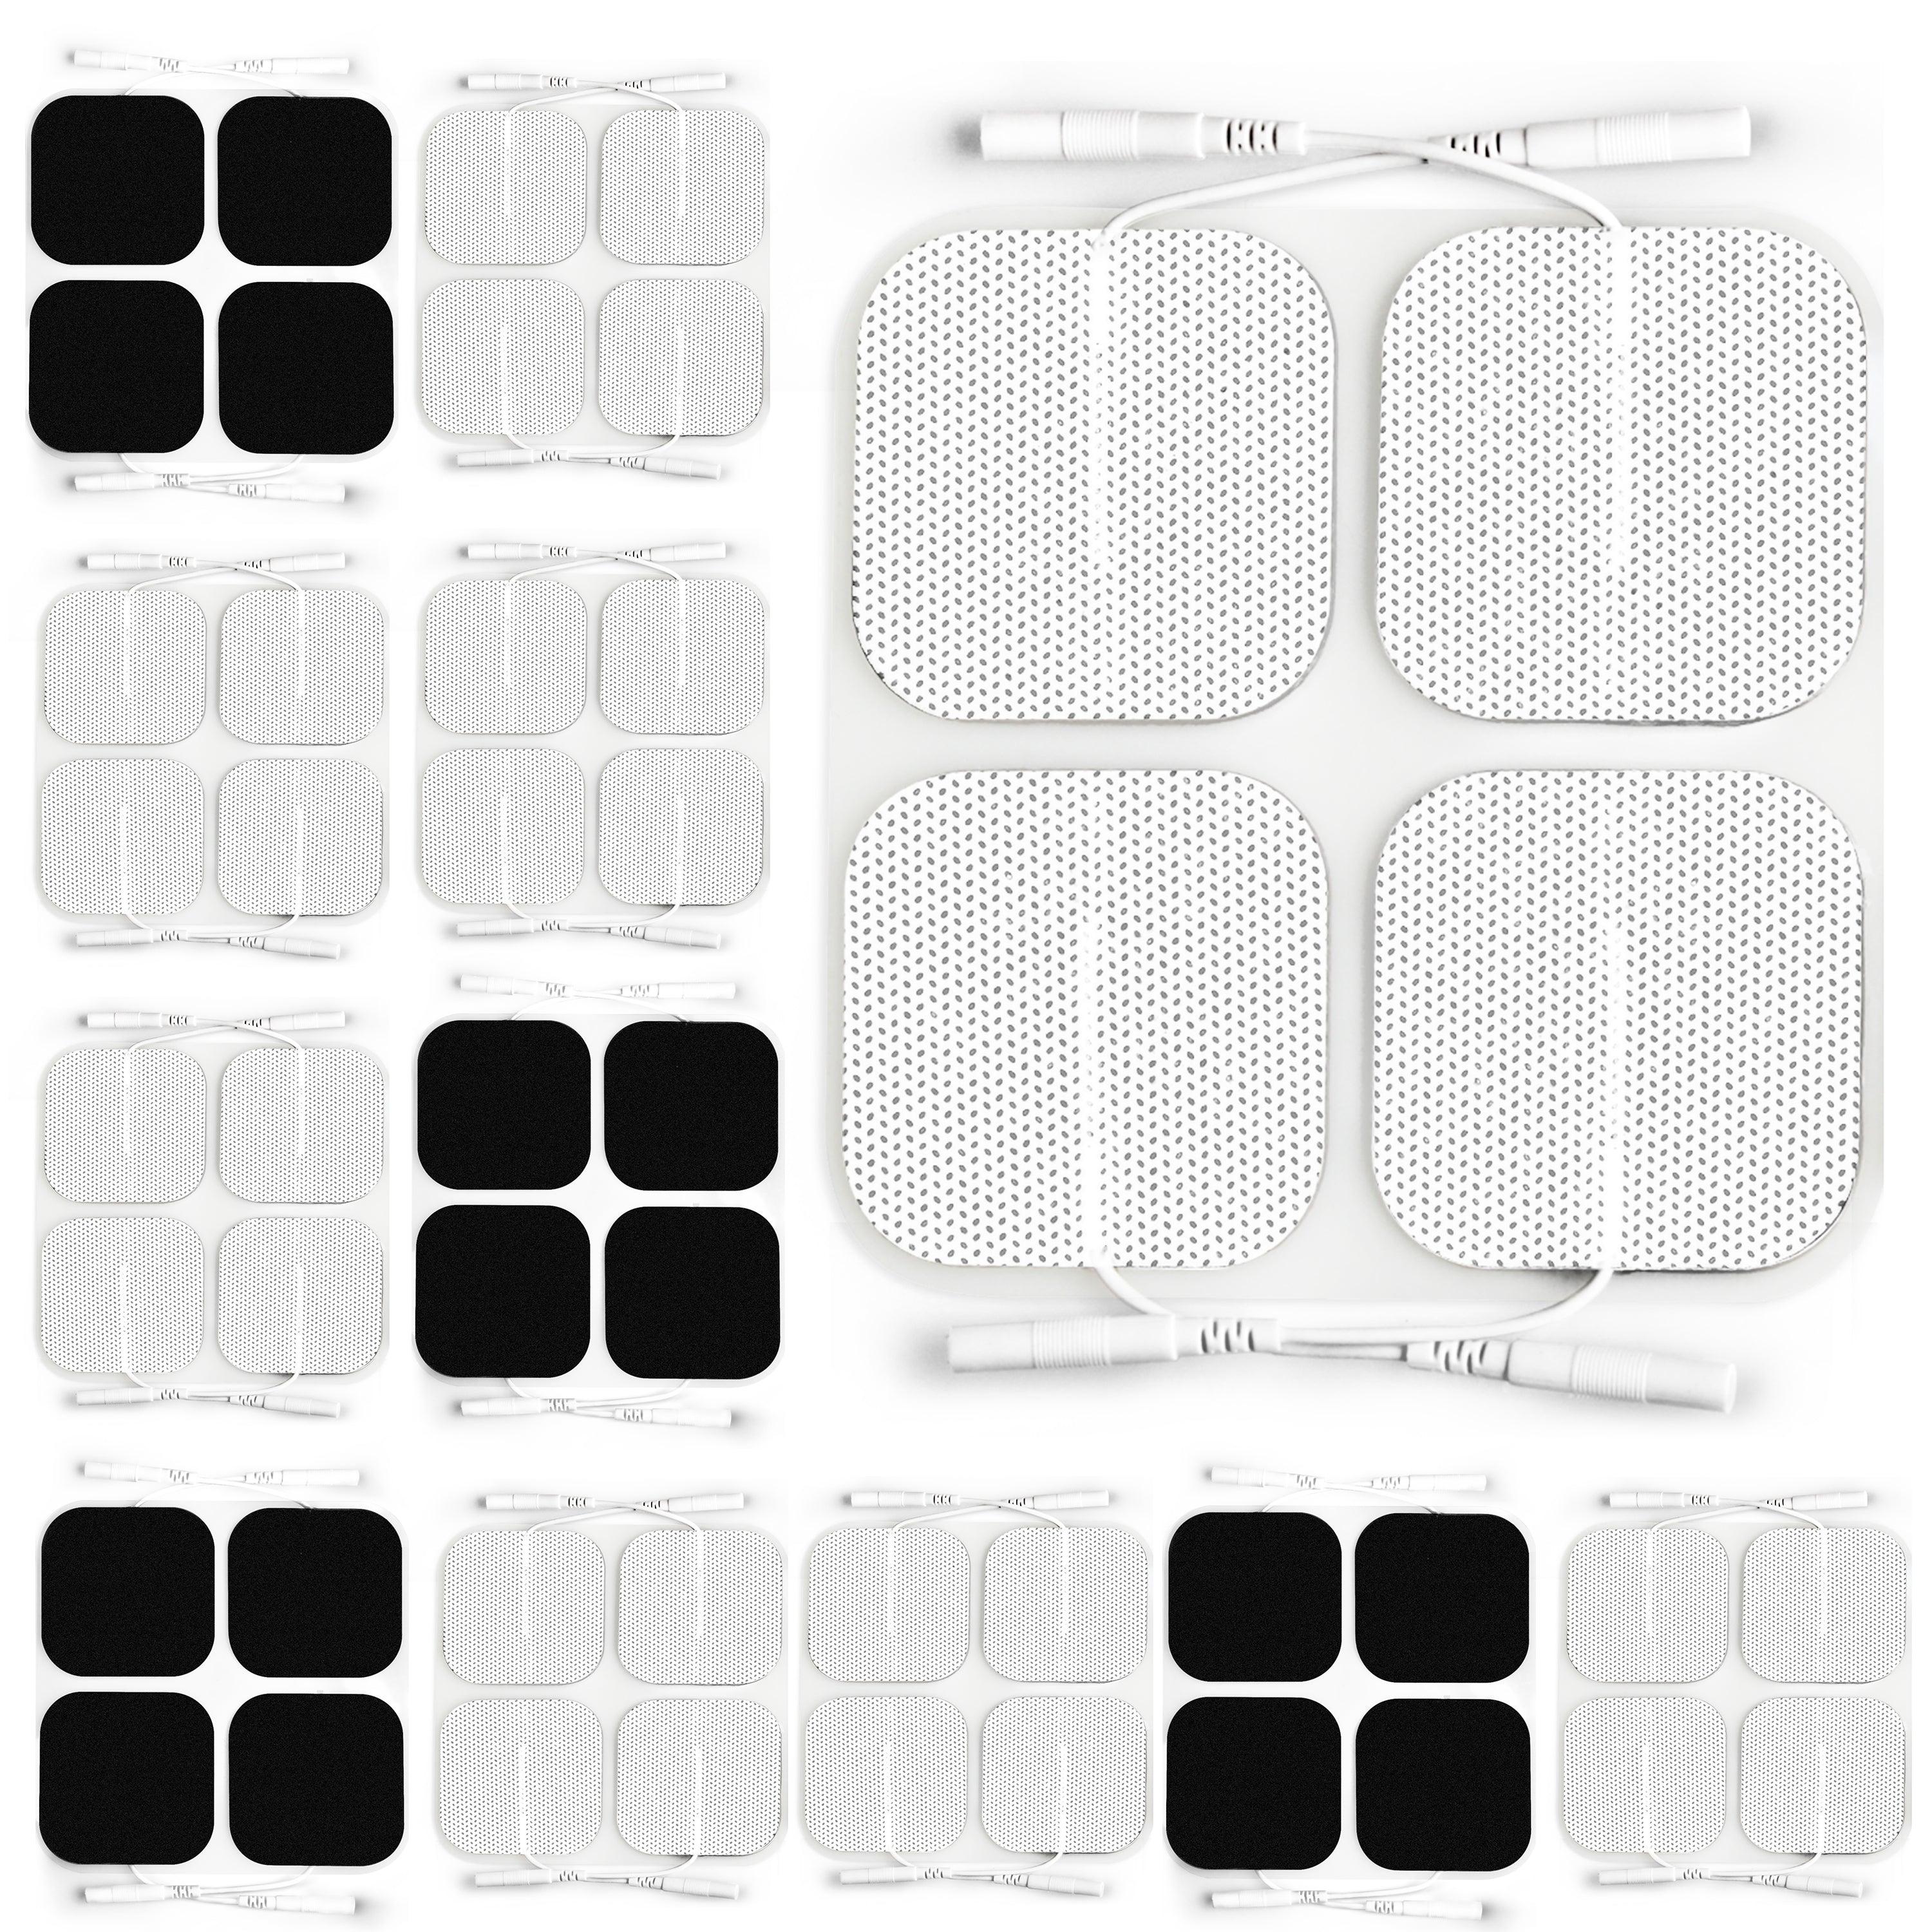 AUVON TENS Unit Replacement Pads, 4 x 8 Large Butterfly Shaped Electrode  Pads for Back/Lower Back Pain, Reusable Latex-Free, Stim Pads with